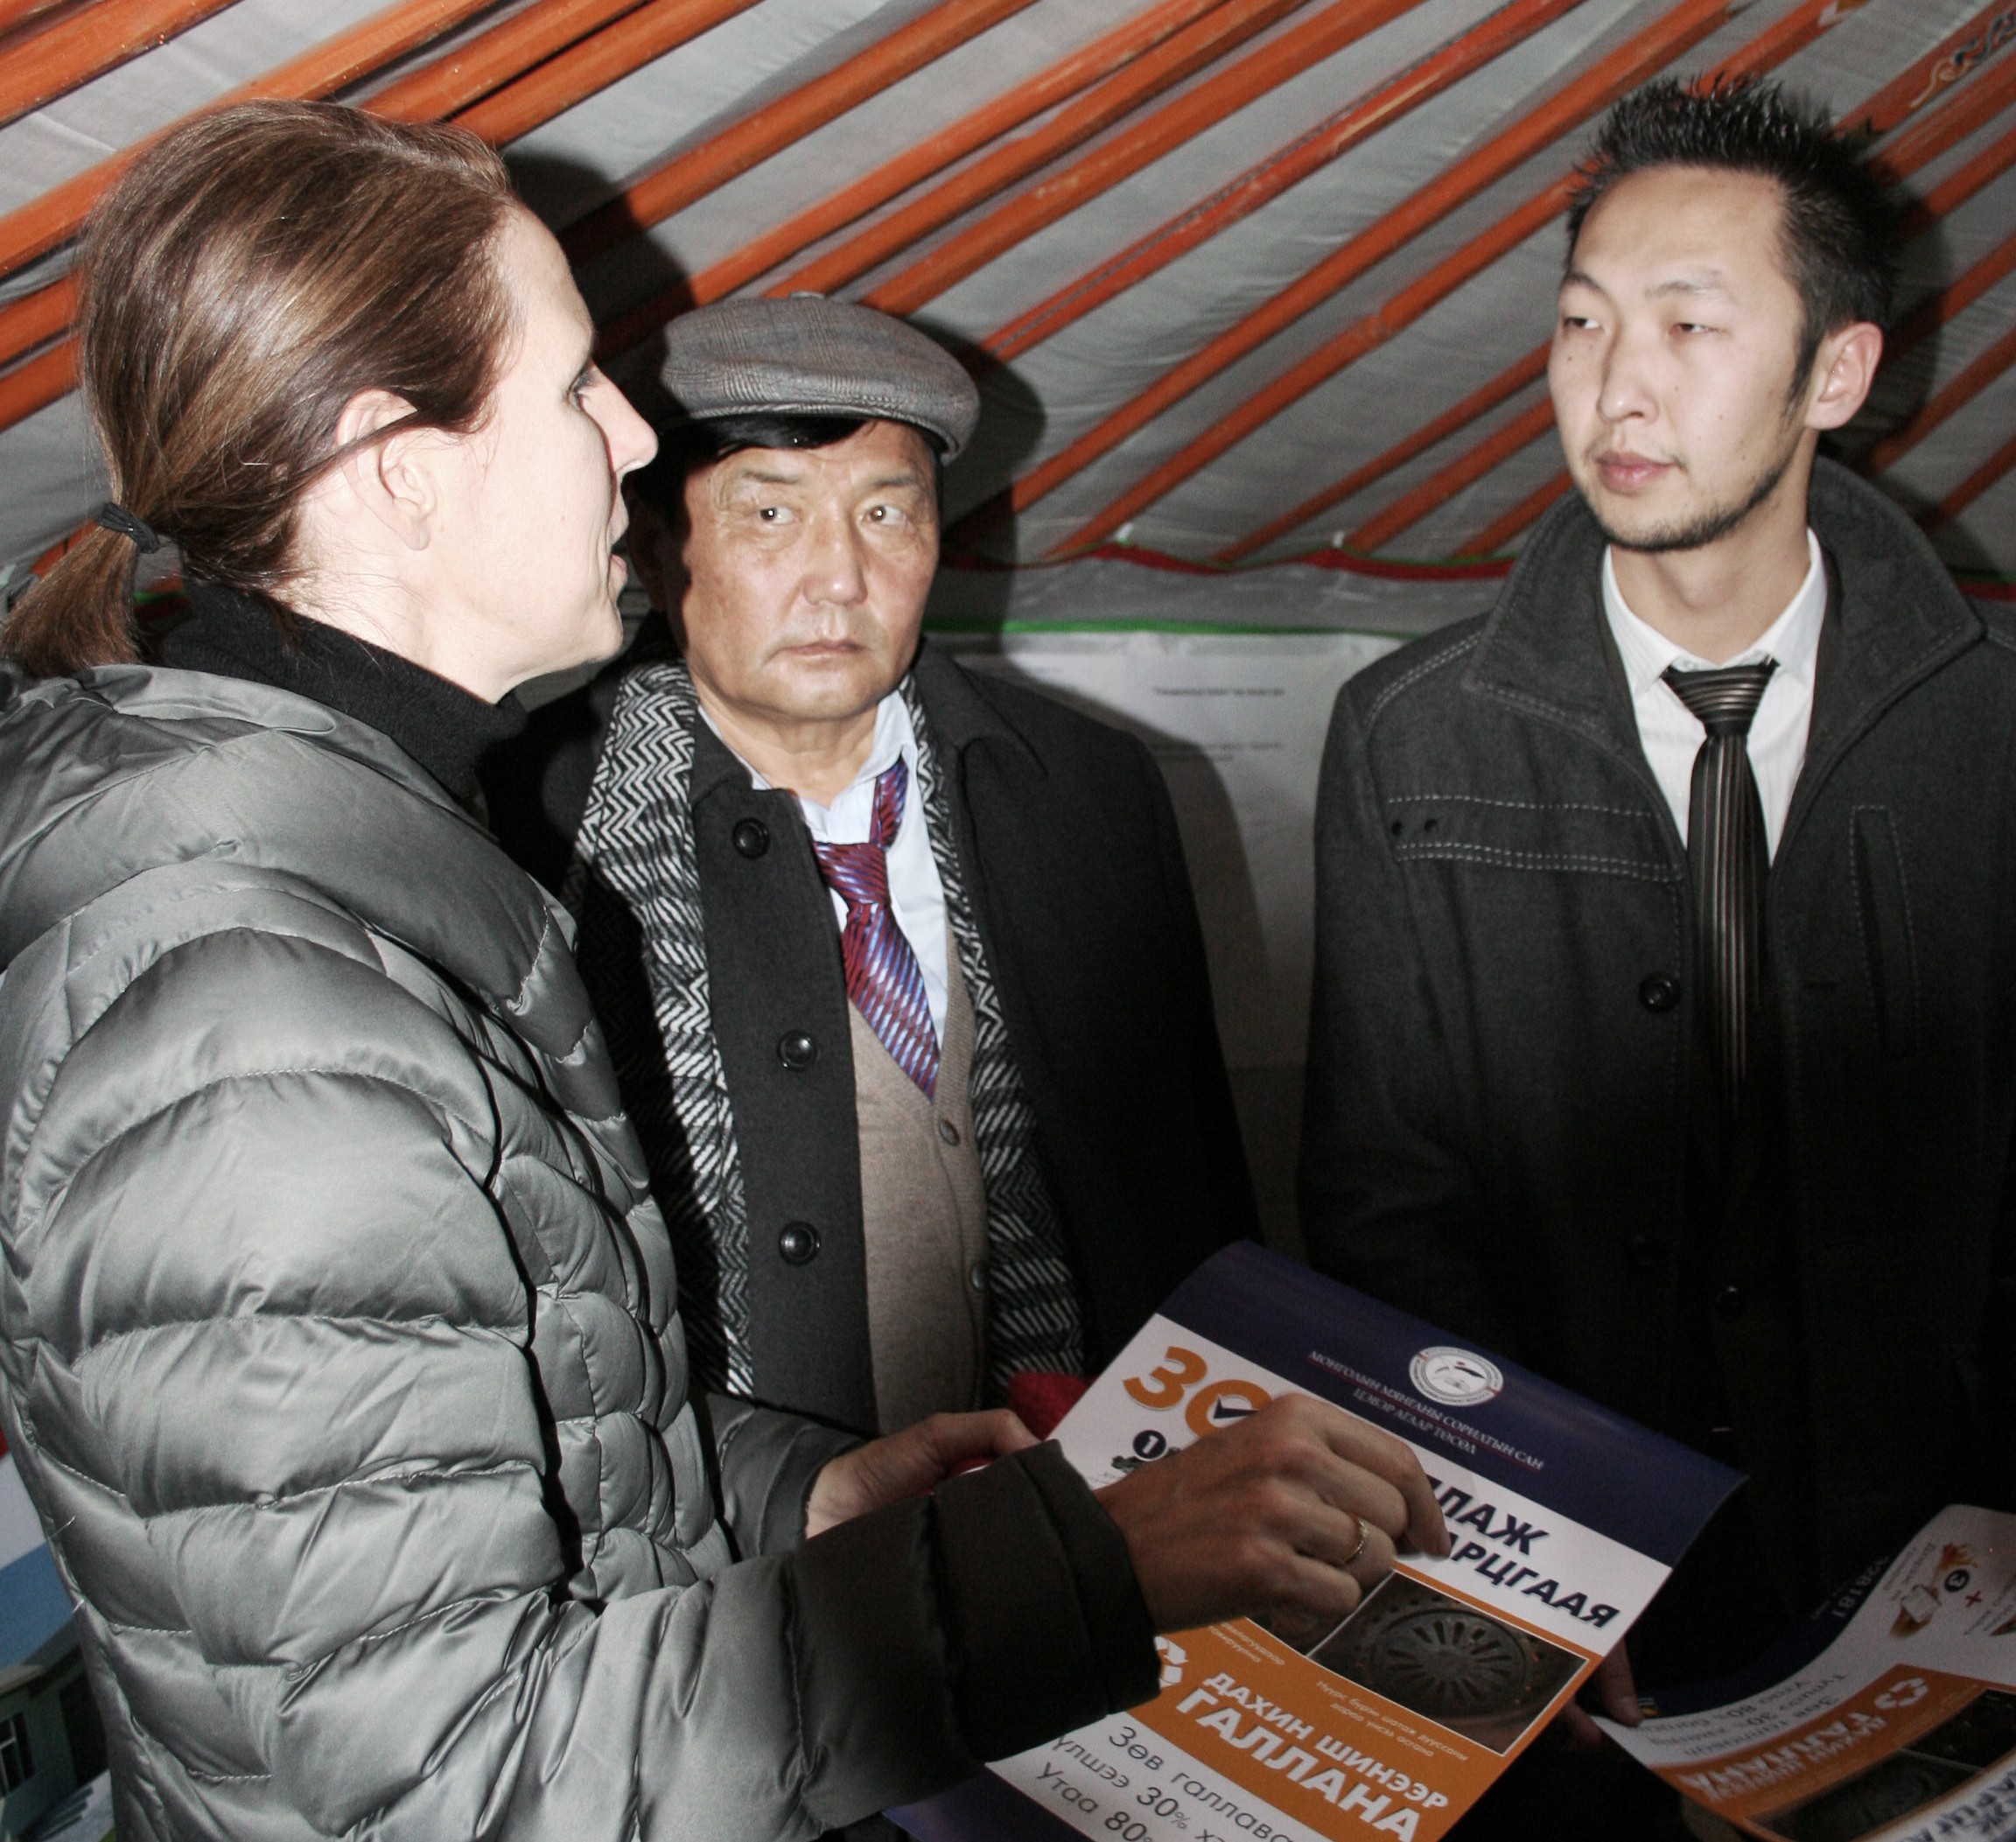 Ambassador Campbell visiting a product information center to see the products in use